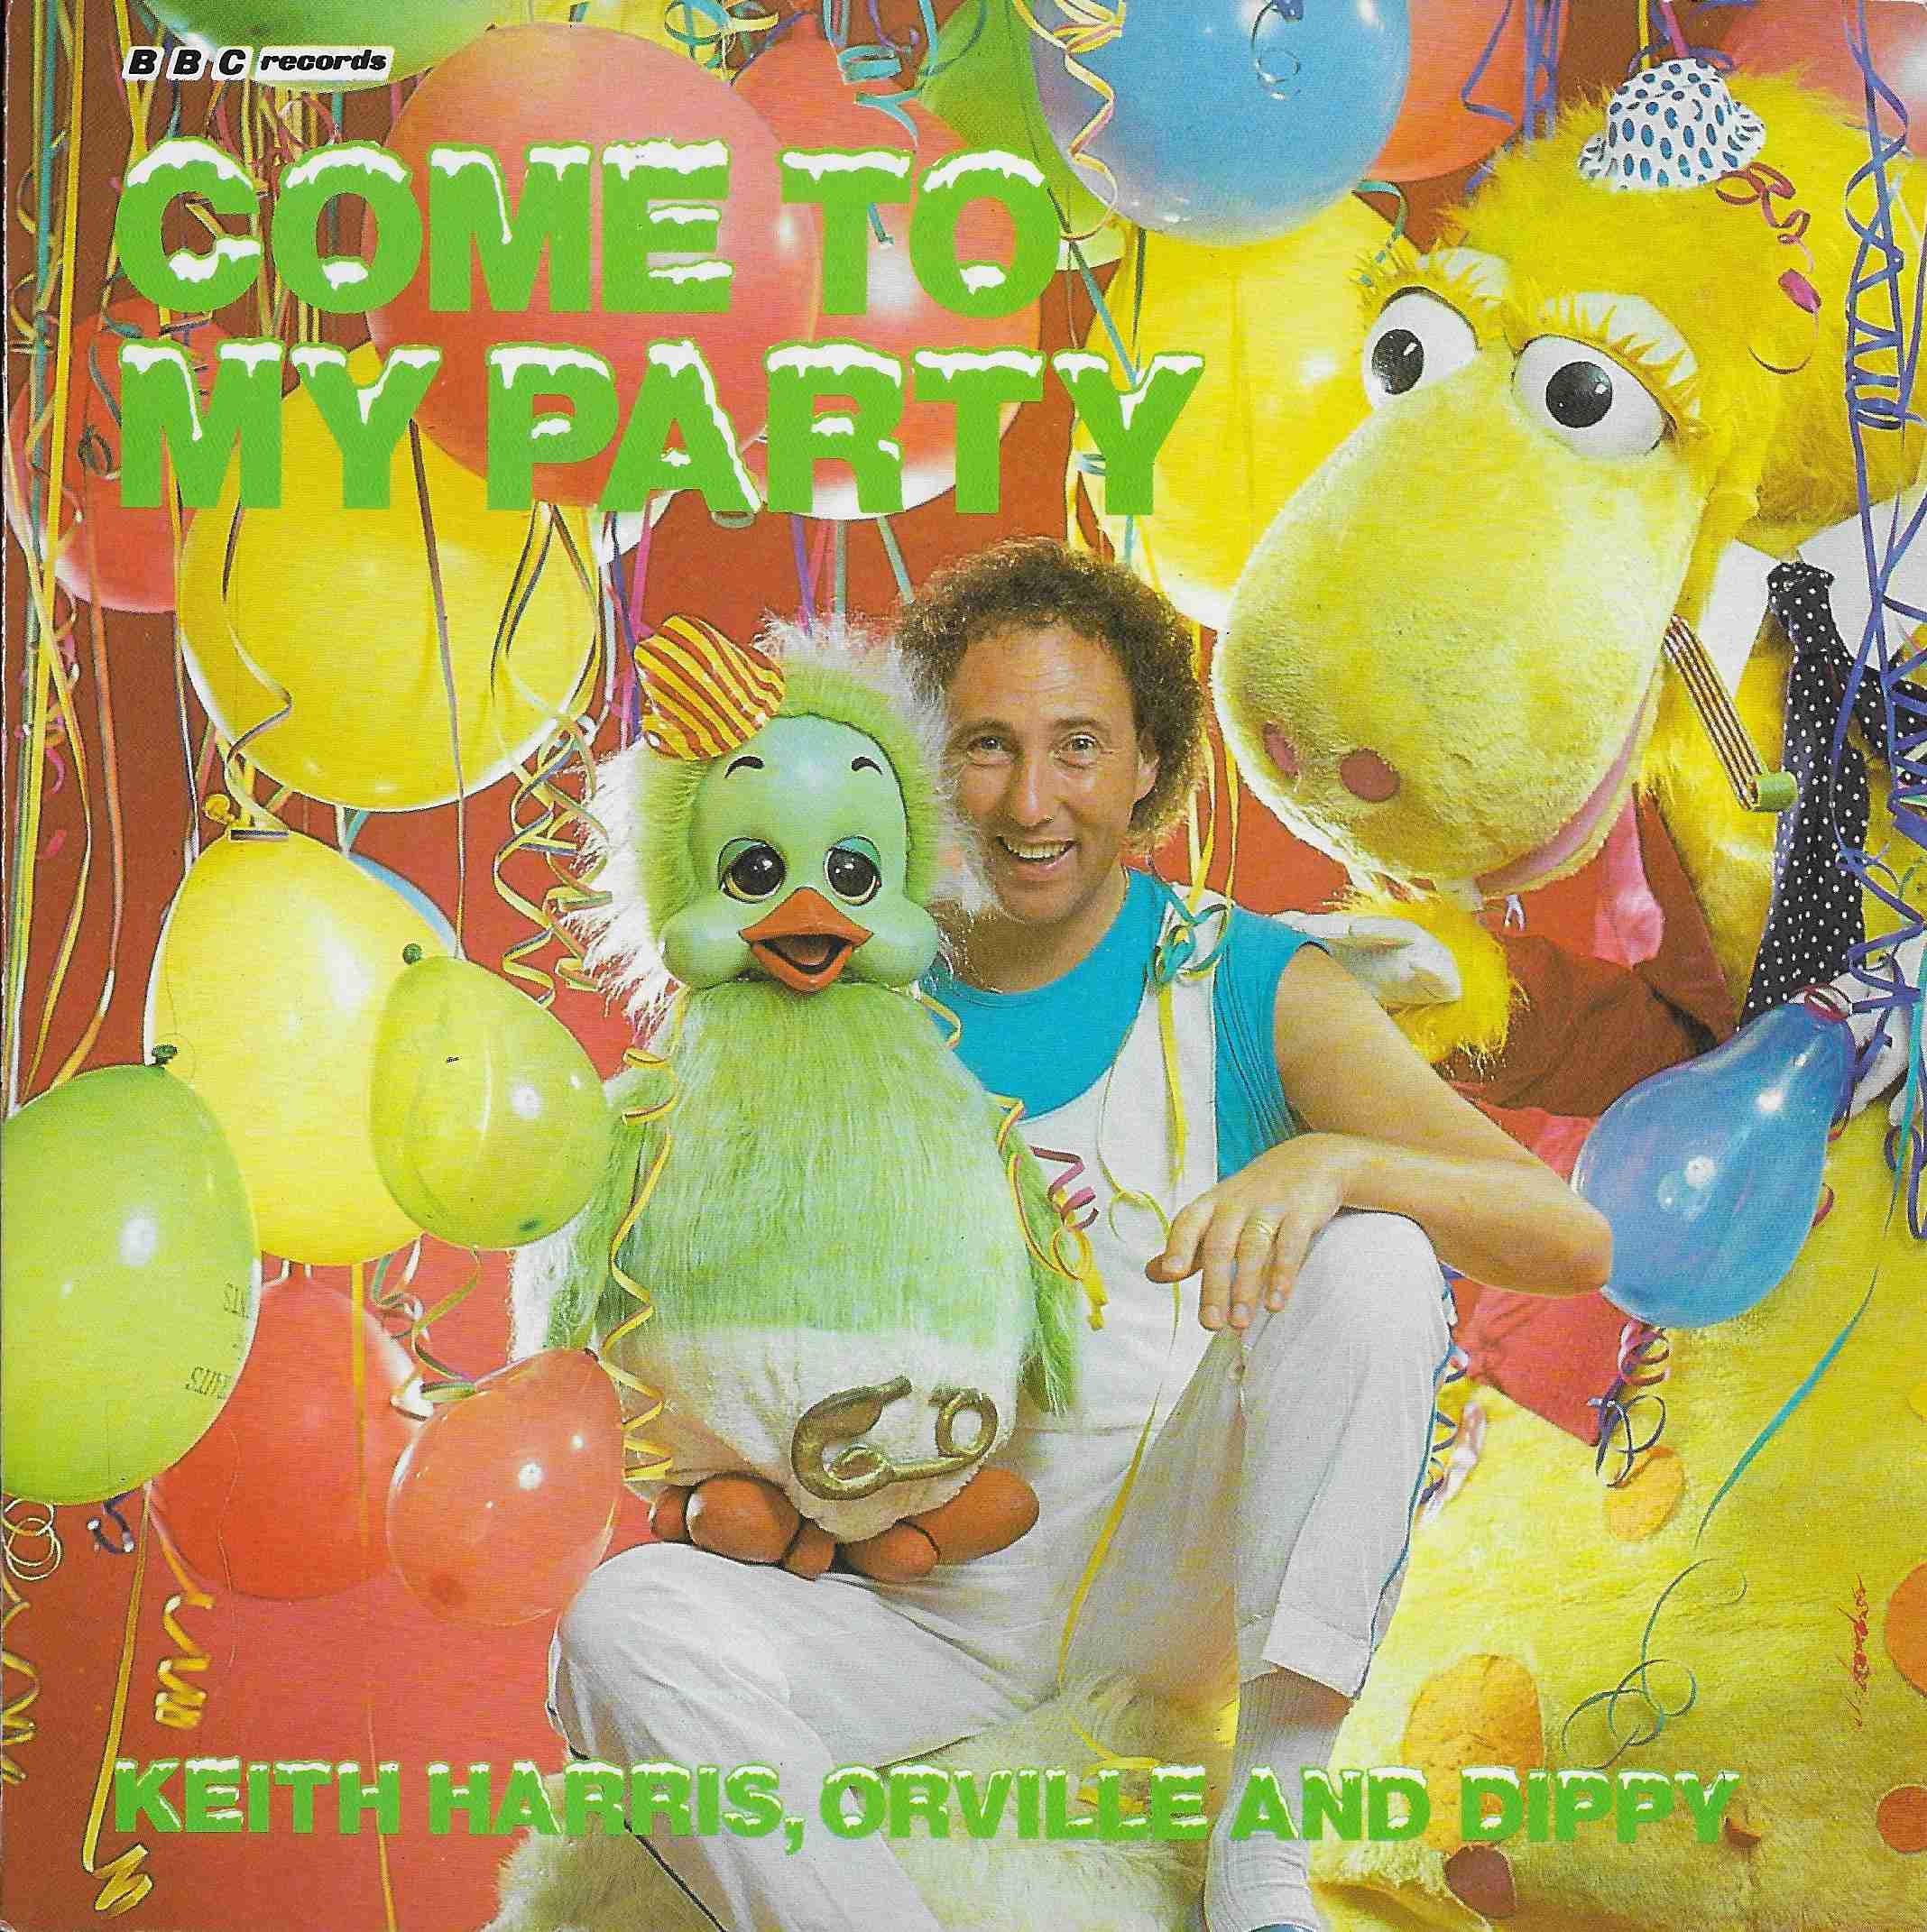 Picture of RESL 138 Come to my party by artist Keith Harris, Orville and Dippy / Keith Harris and Orville from the BBC singles - Records and Tapes library